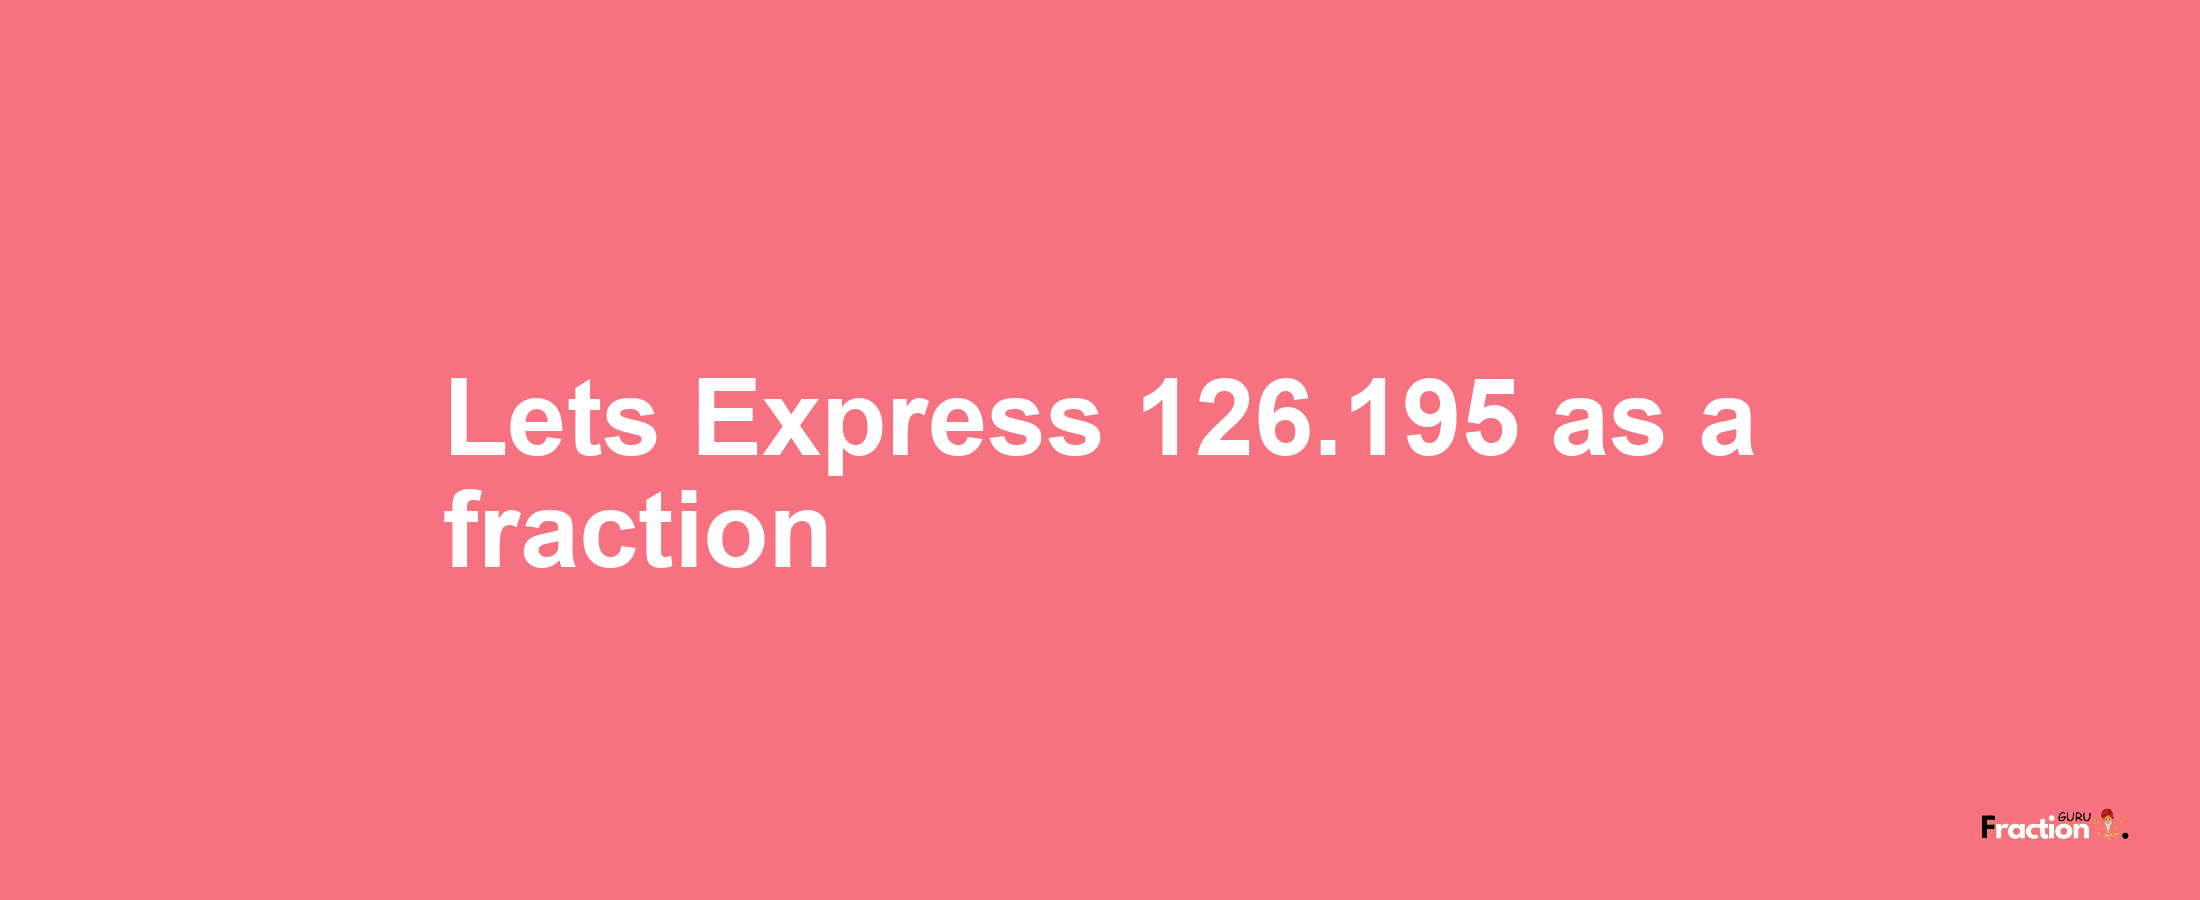 Lets Express 126.195 as afraction